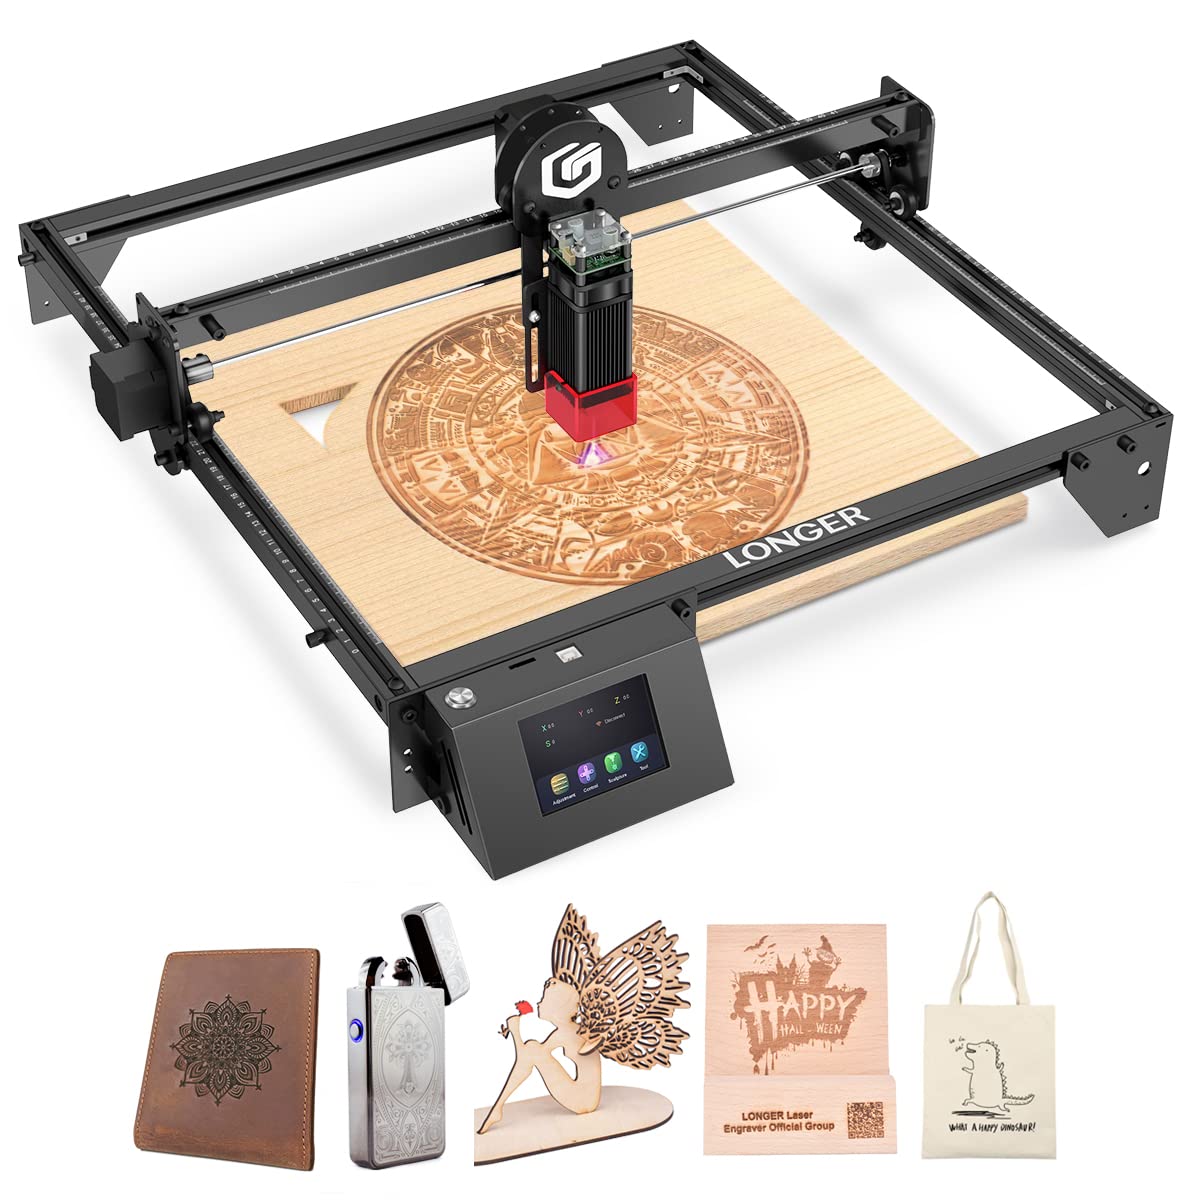 Longer RAY5 5W Laser Engraver is an economical machine suitable for beginners the spot size of 0.08*0.08mm, App Offline Control, DIY Engraver Tool for Metal/Glass/Wood, Engraving Area of 15.7"x15.7"